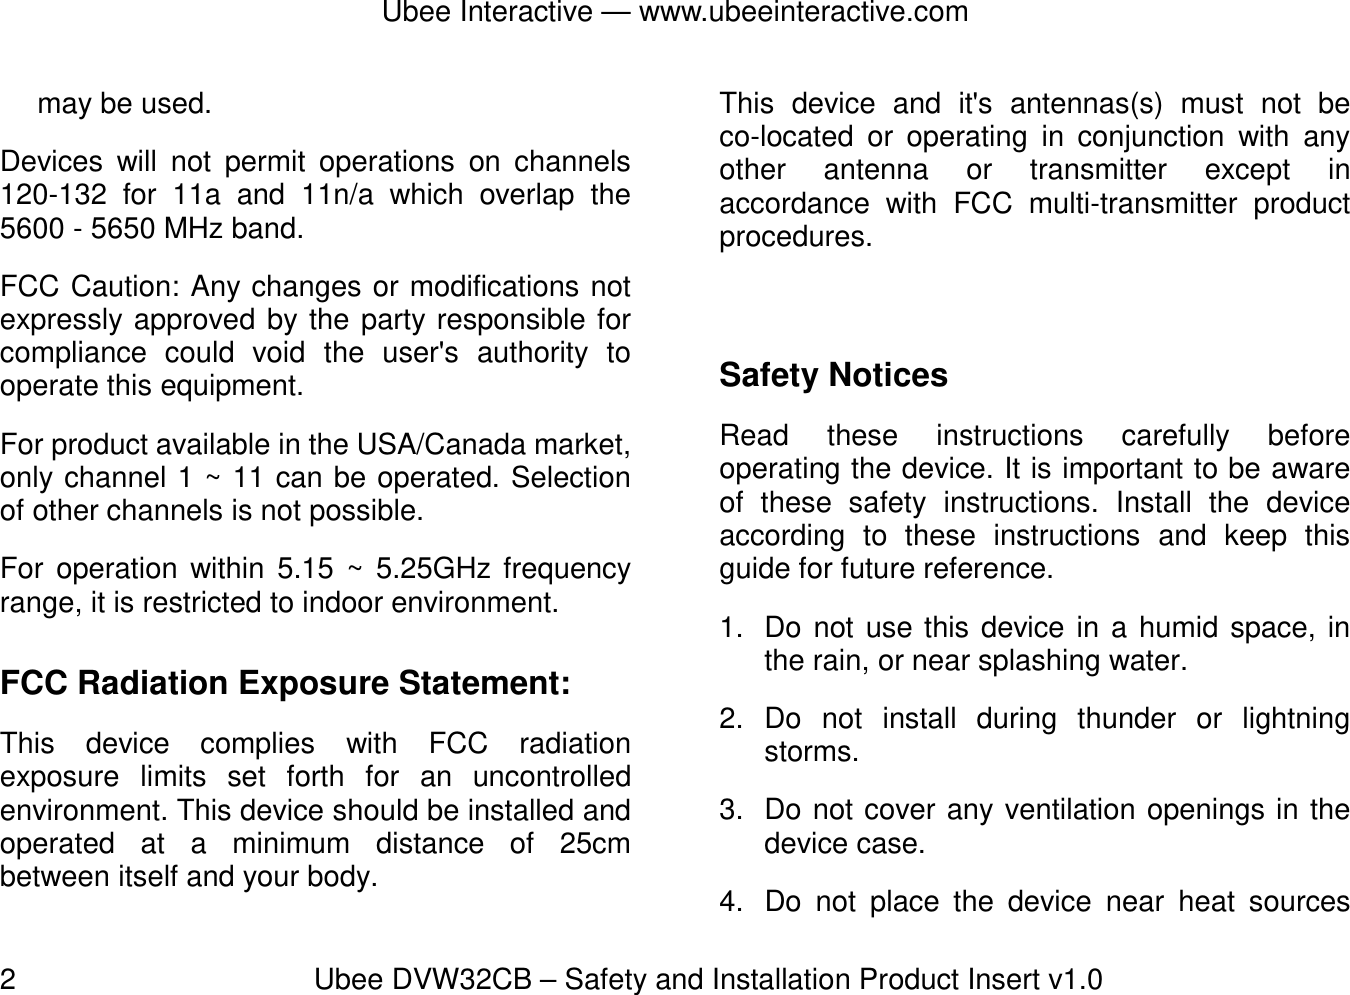 Ubee Interactive — www.ubeeinteractive.com 2          Ubee DVW32CB – Safety and Installation Product Insert v1.0 may be used. Devices will not permit operations on channels 120-132 for 11a and 11n/a which overlap the 5600 - 5650 MHz band. FCC Caution: Any changes or modifications not expressly approved by the party responsible for compliance could void the user&apos;s authority to operate this equipment. For product available in the USA/Canada market, only channel 1 ~ 11 can be operated. Selection of other channels is not possible. For operation within 5.15 ~ 5.25GHz frequency range, it is restricted to indoor environment.   FCC Radiation Exposure Statement: This device complies with FCC radiation exposure limits set forth for an uncontrolled environment. This device should be installed and operated at a minimum distance of 25cm between itself and your body. This device and it&apos;s antennas(s) must not be co-located or operating in conjunction with any other antenna or transmitter except in accordance with FCC multi-transmitter product procedures.  Safety Notices   Read these instructions carefully before operating the device. It is important to be aware of these safety instructions. Install the device according to these instructions and keep this guide for future reference. 1.  Do not use this device in a humid space, in the rain, or near splashing water. 2. Do not install during thunder or lightning storms. 3.  Do not cover any ventilation openings in the device case. 4.  Do not place the device near heat sources 